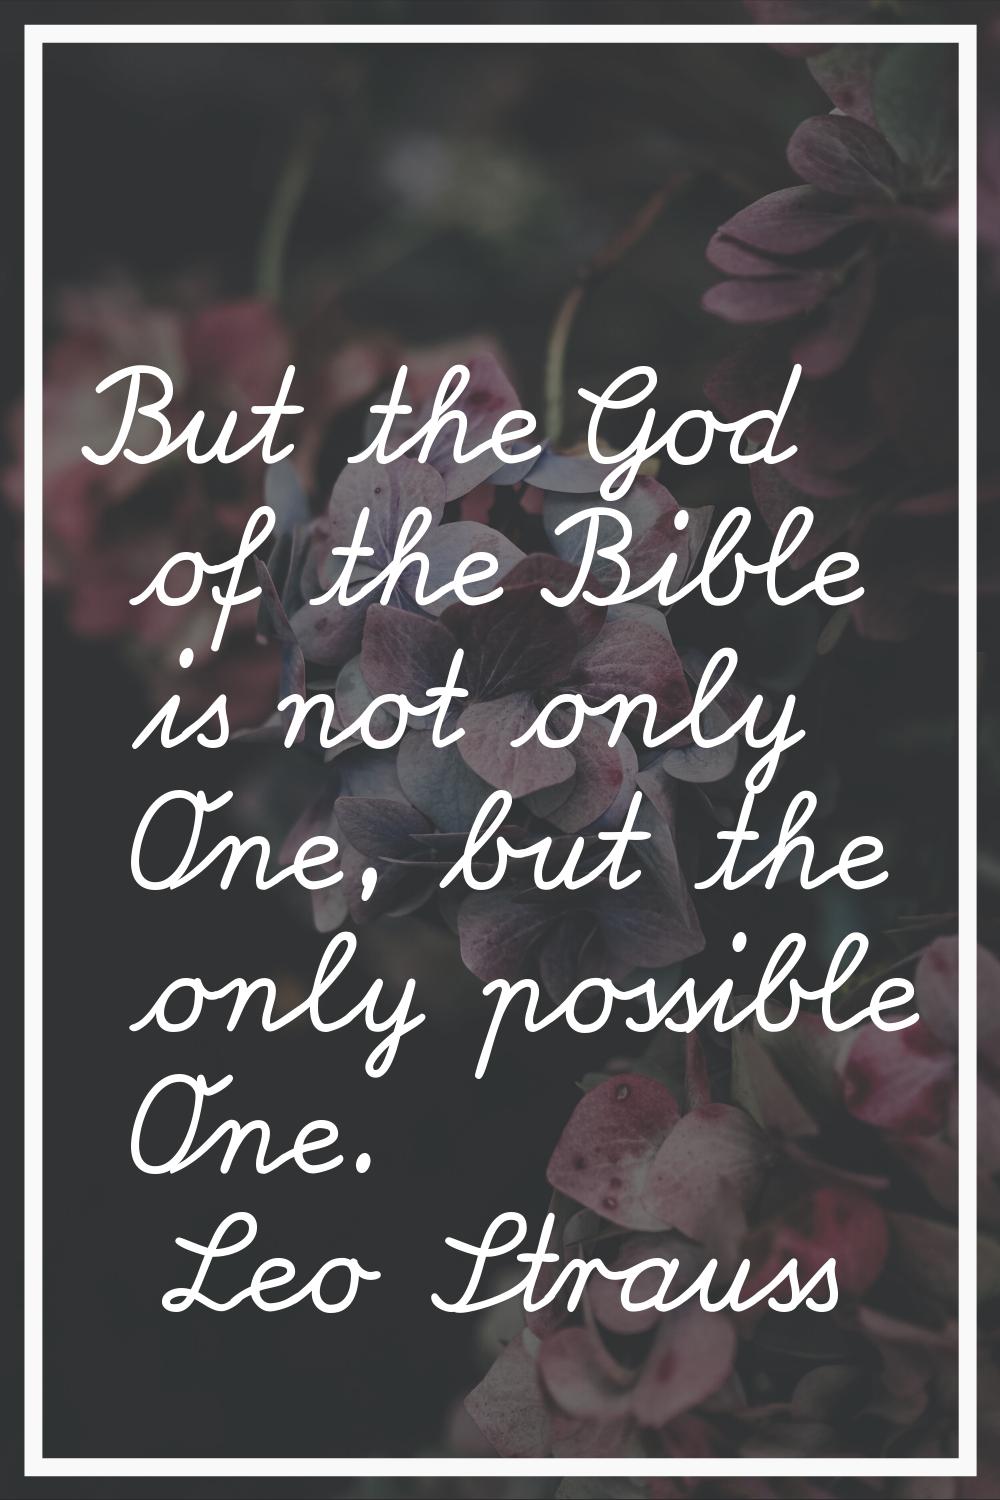 But the God of the Bible is not only One, but the only possible One.